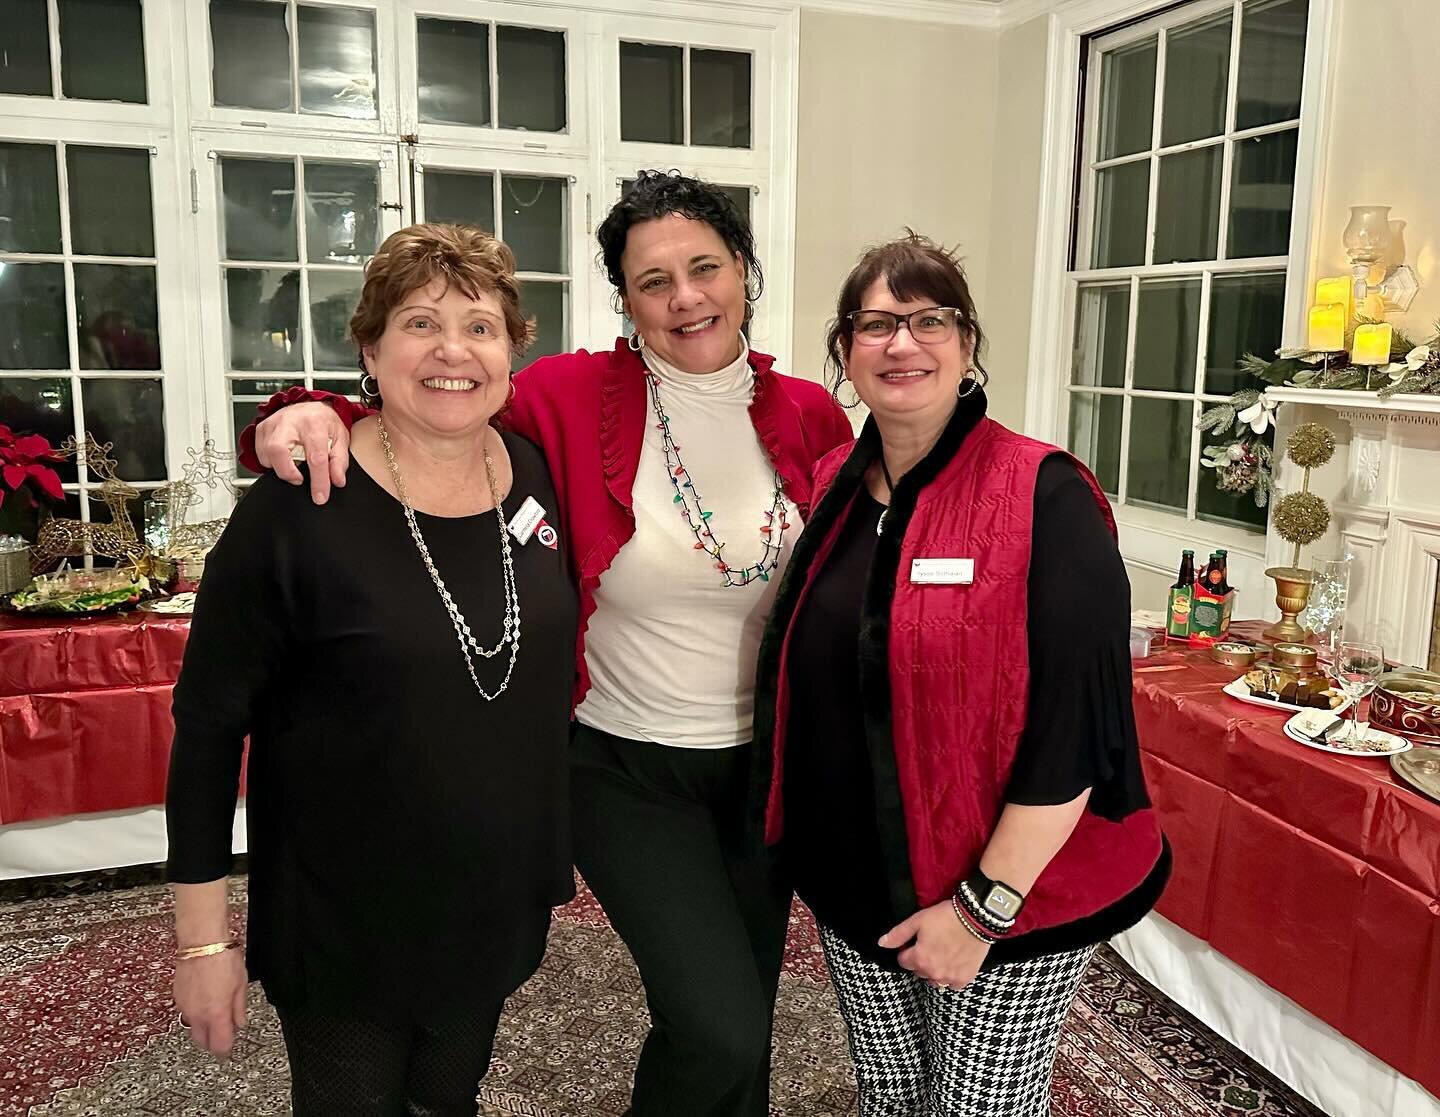 Holiday Party Highlights- we sponsored 4 families with Families First and 8 senior citizens through Rockingham County Nutrition and Meals on Wheels this holiday season 🎄🎁🎄 #gfwc #gfwcnh #portsmouthnh #familiesfirst #rockinghamcountymealsonwheels